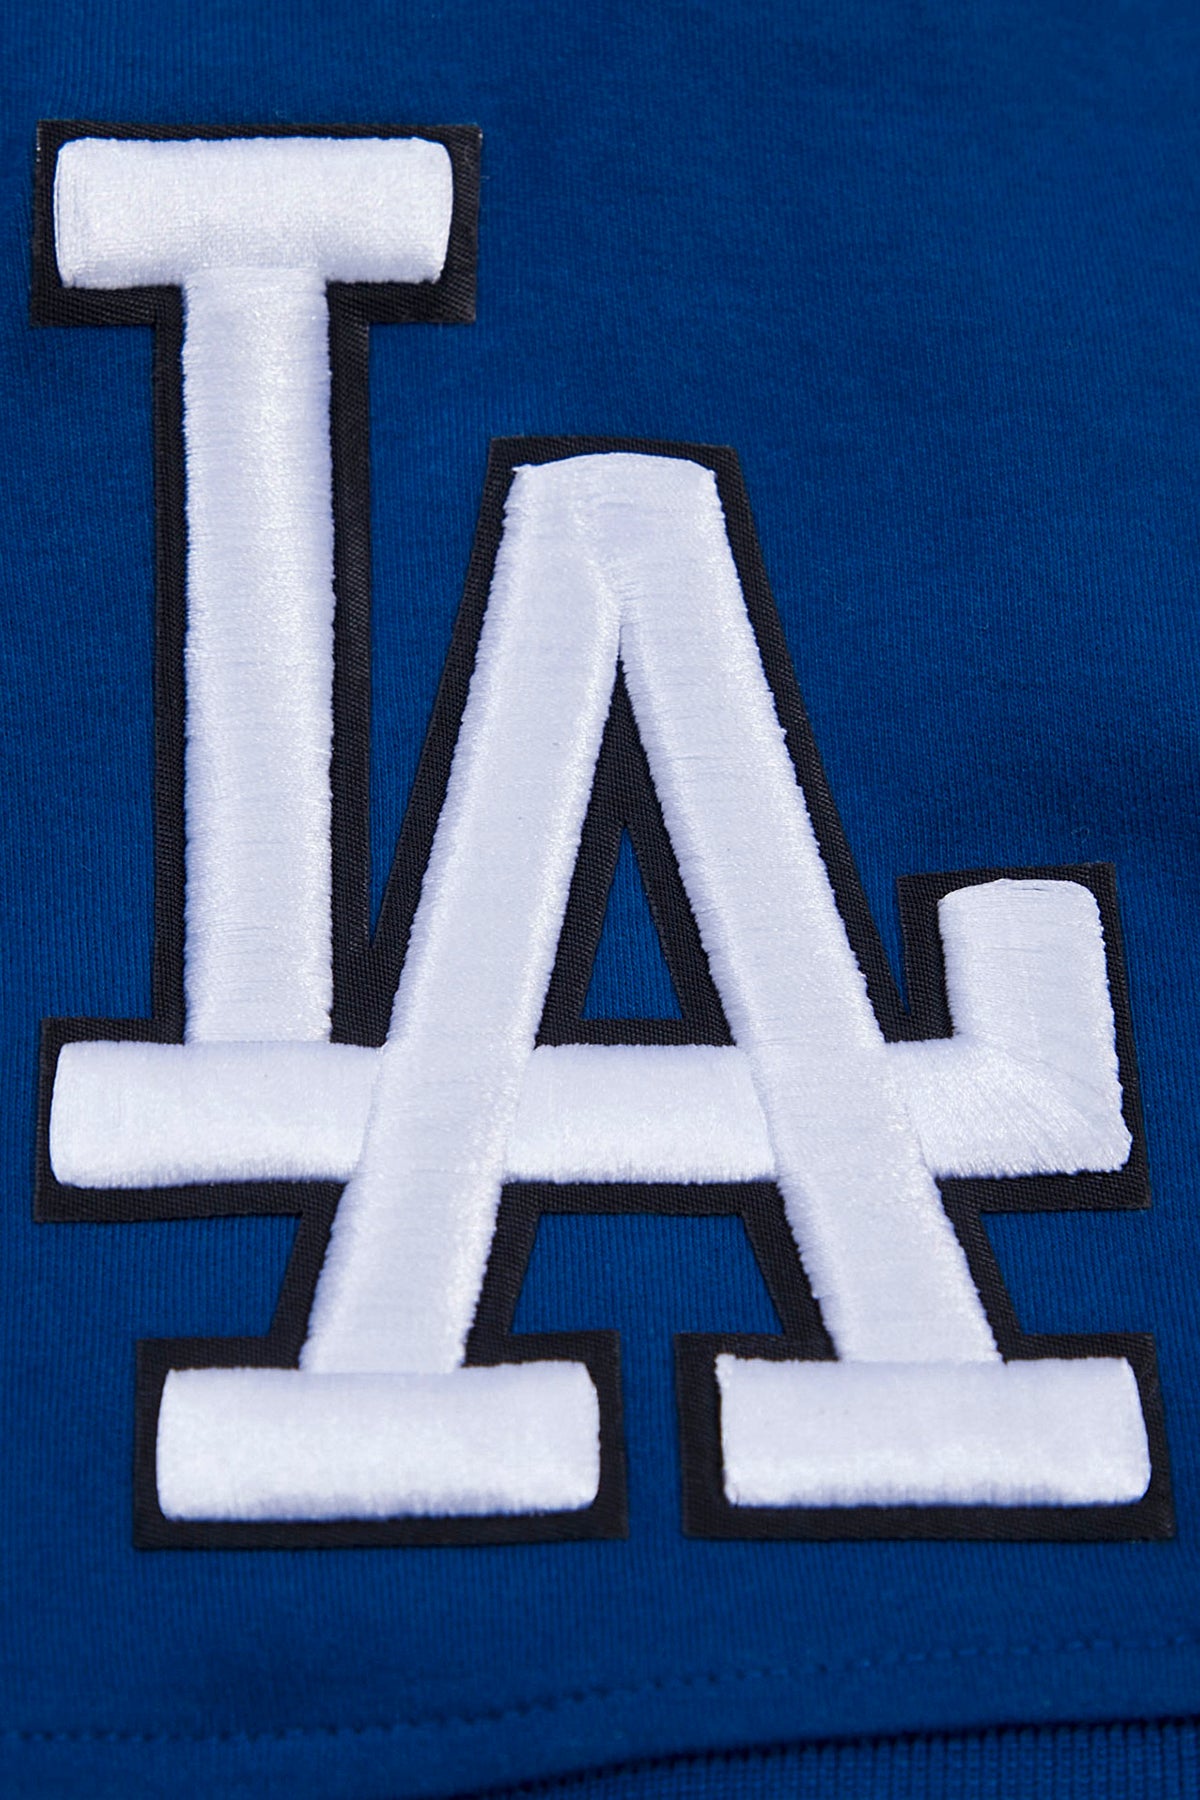 Los Angeles Dodgers Tack Wall Pads - State Street Products